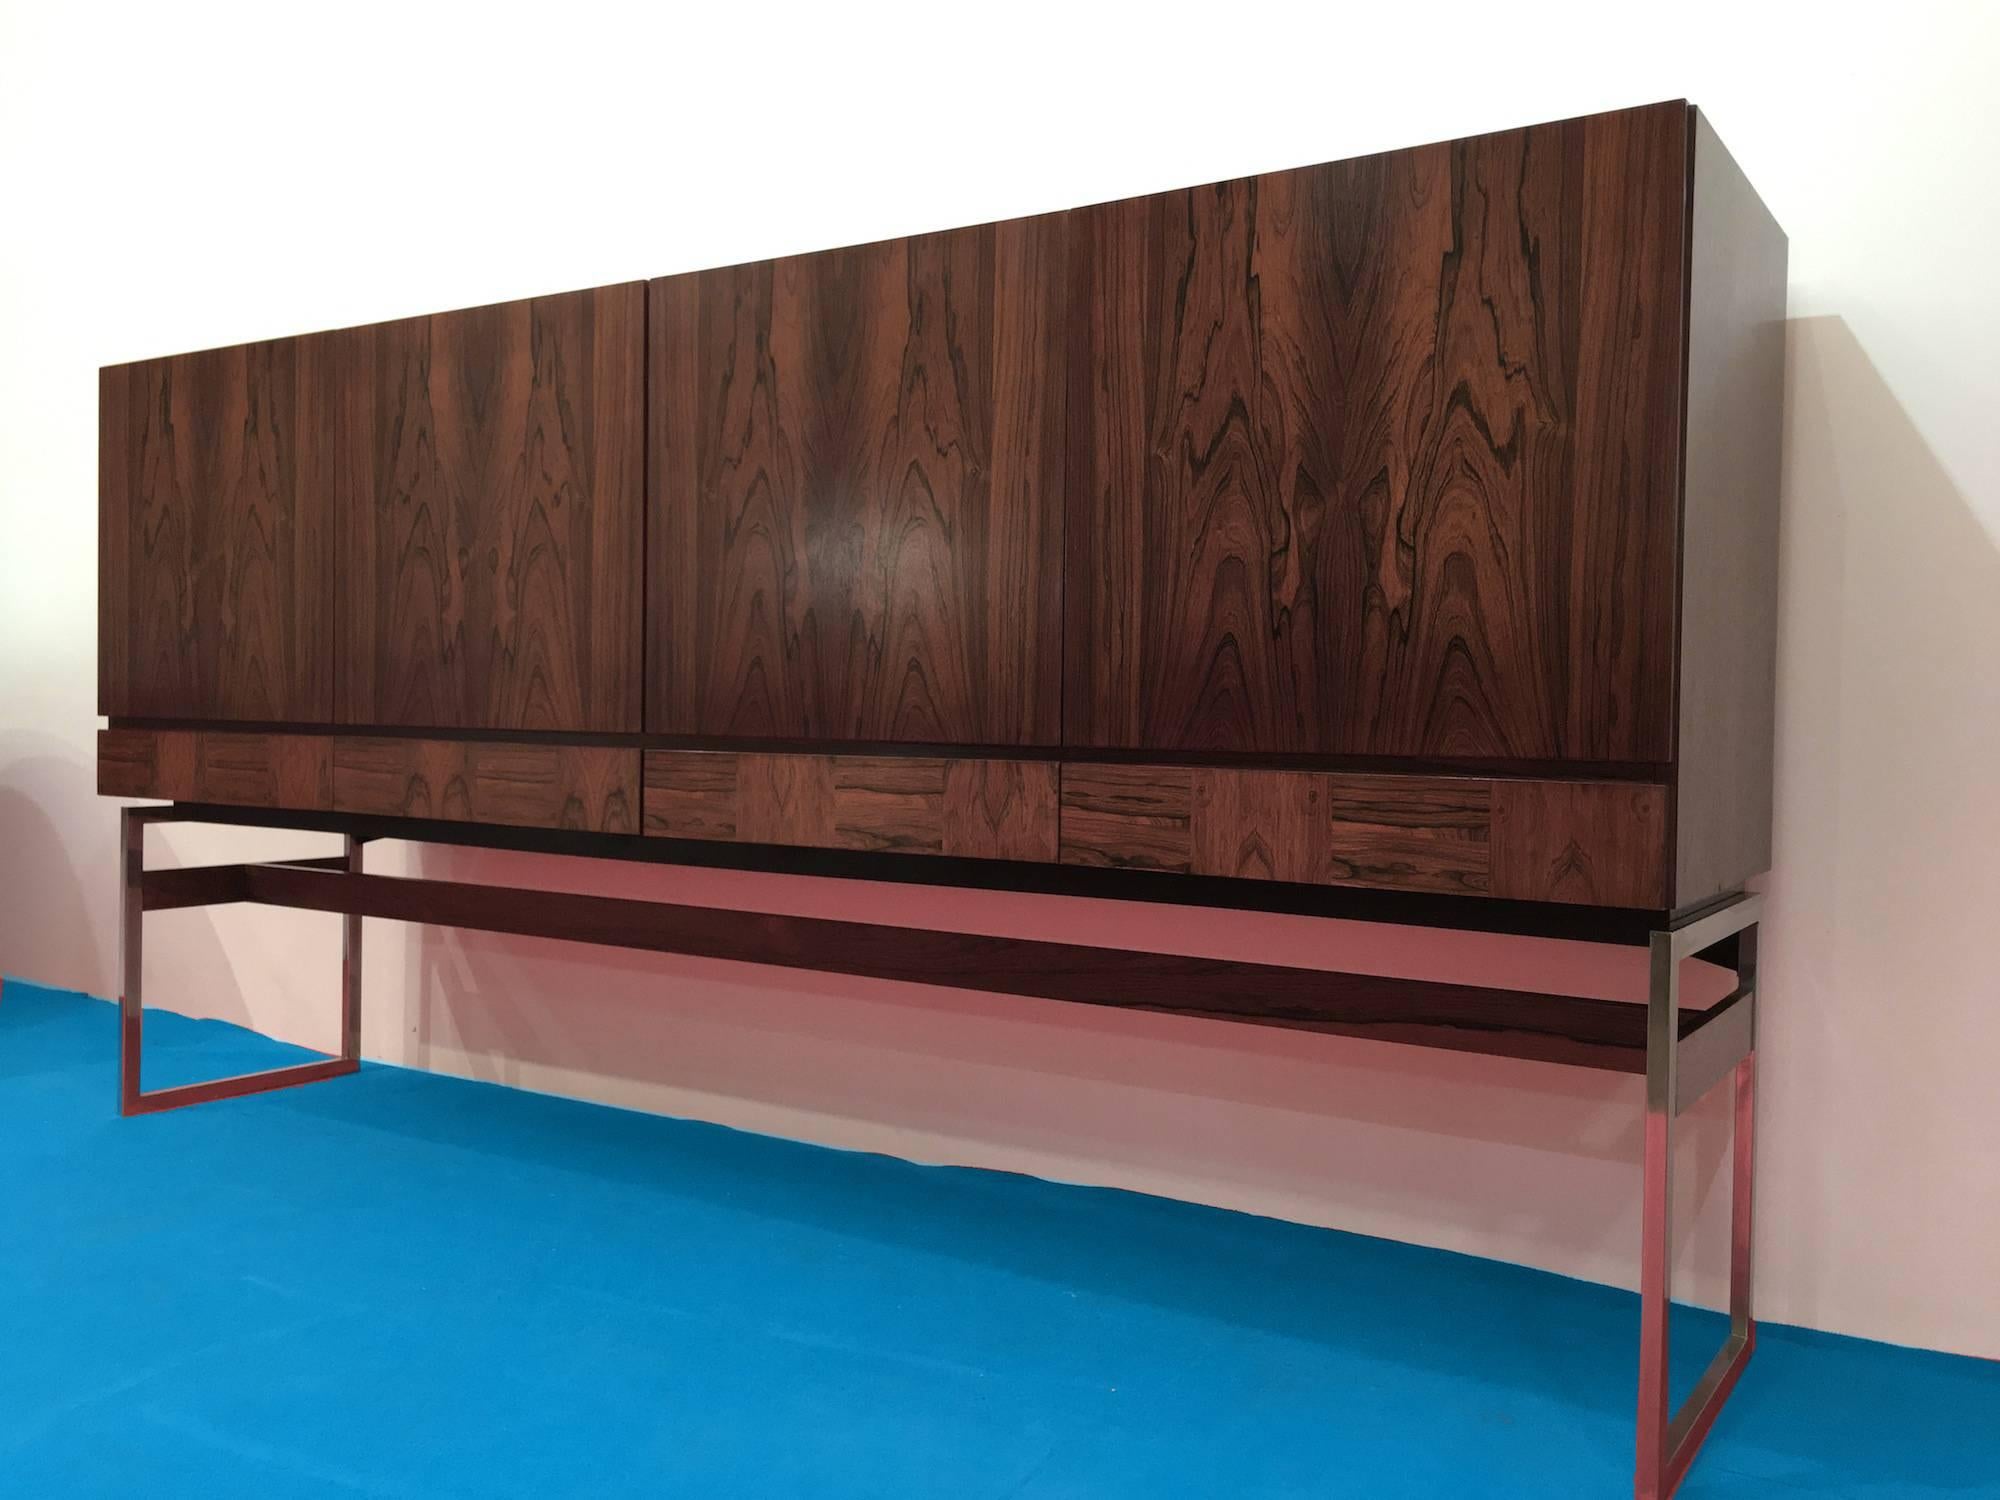 Elegant Rudolf Bernd Glatzel Rio rosewood dressoir, sideboard for Fristho Franeker in Netherlands. It's opening with four doors and four drawers. The maple inlay shelves and drawers provide a large storage space. The metal chromed base is orned with